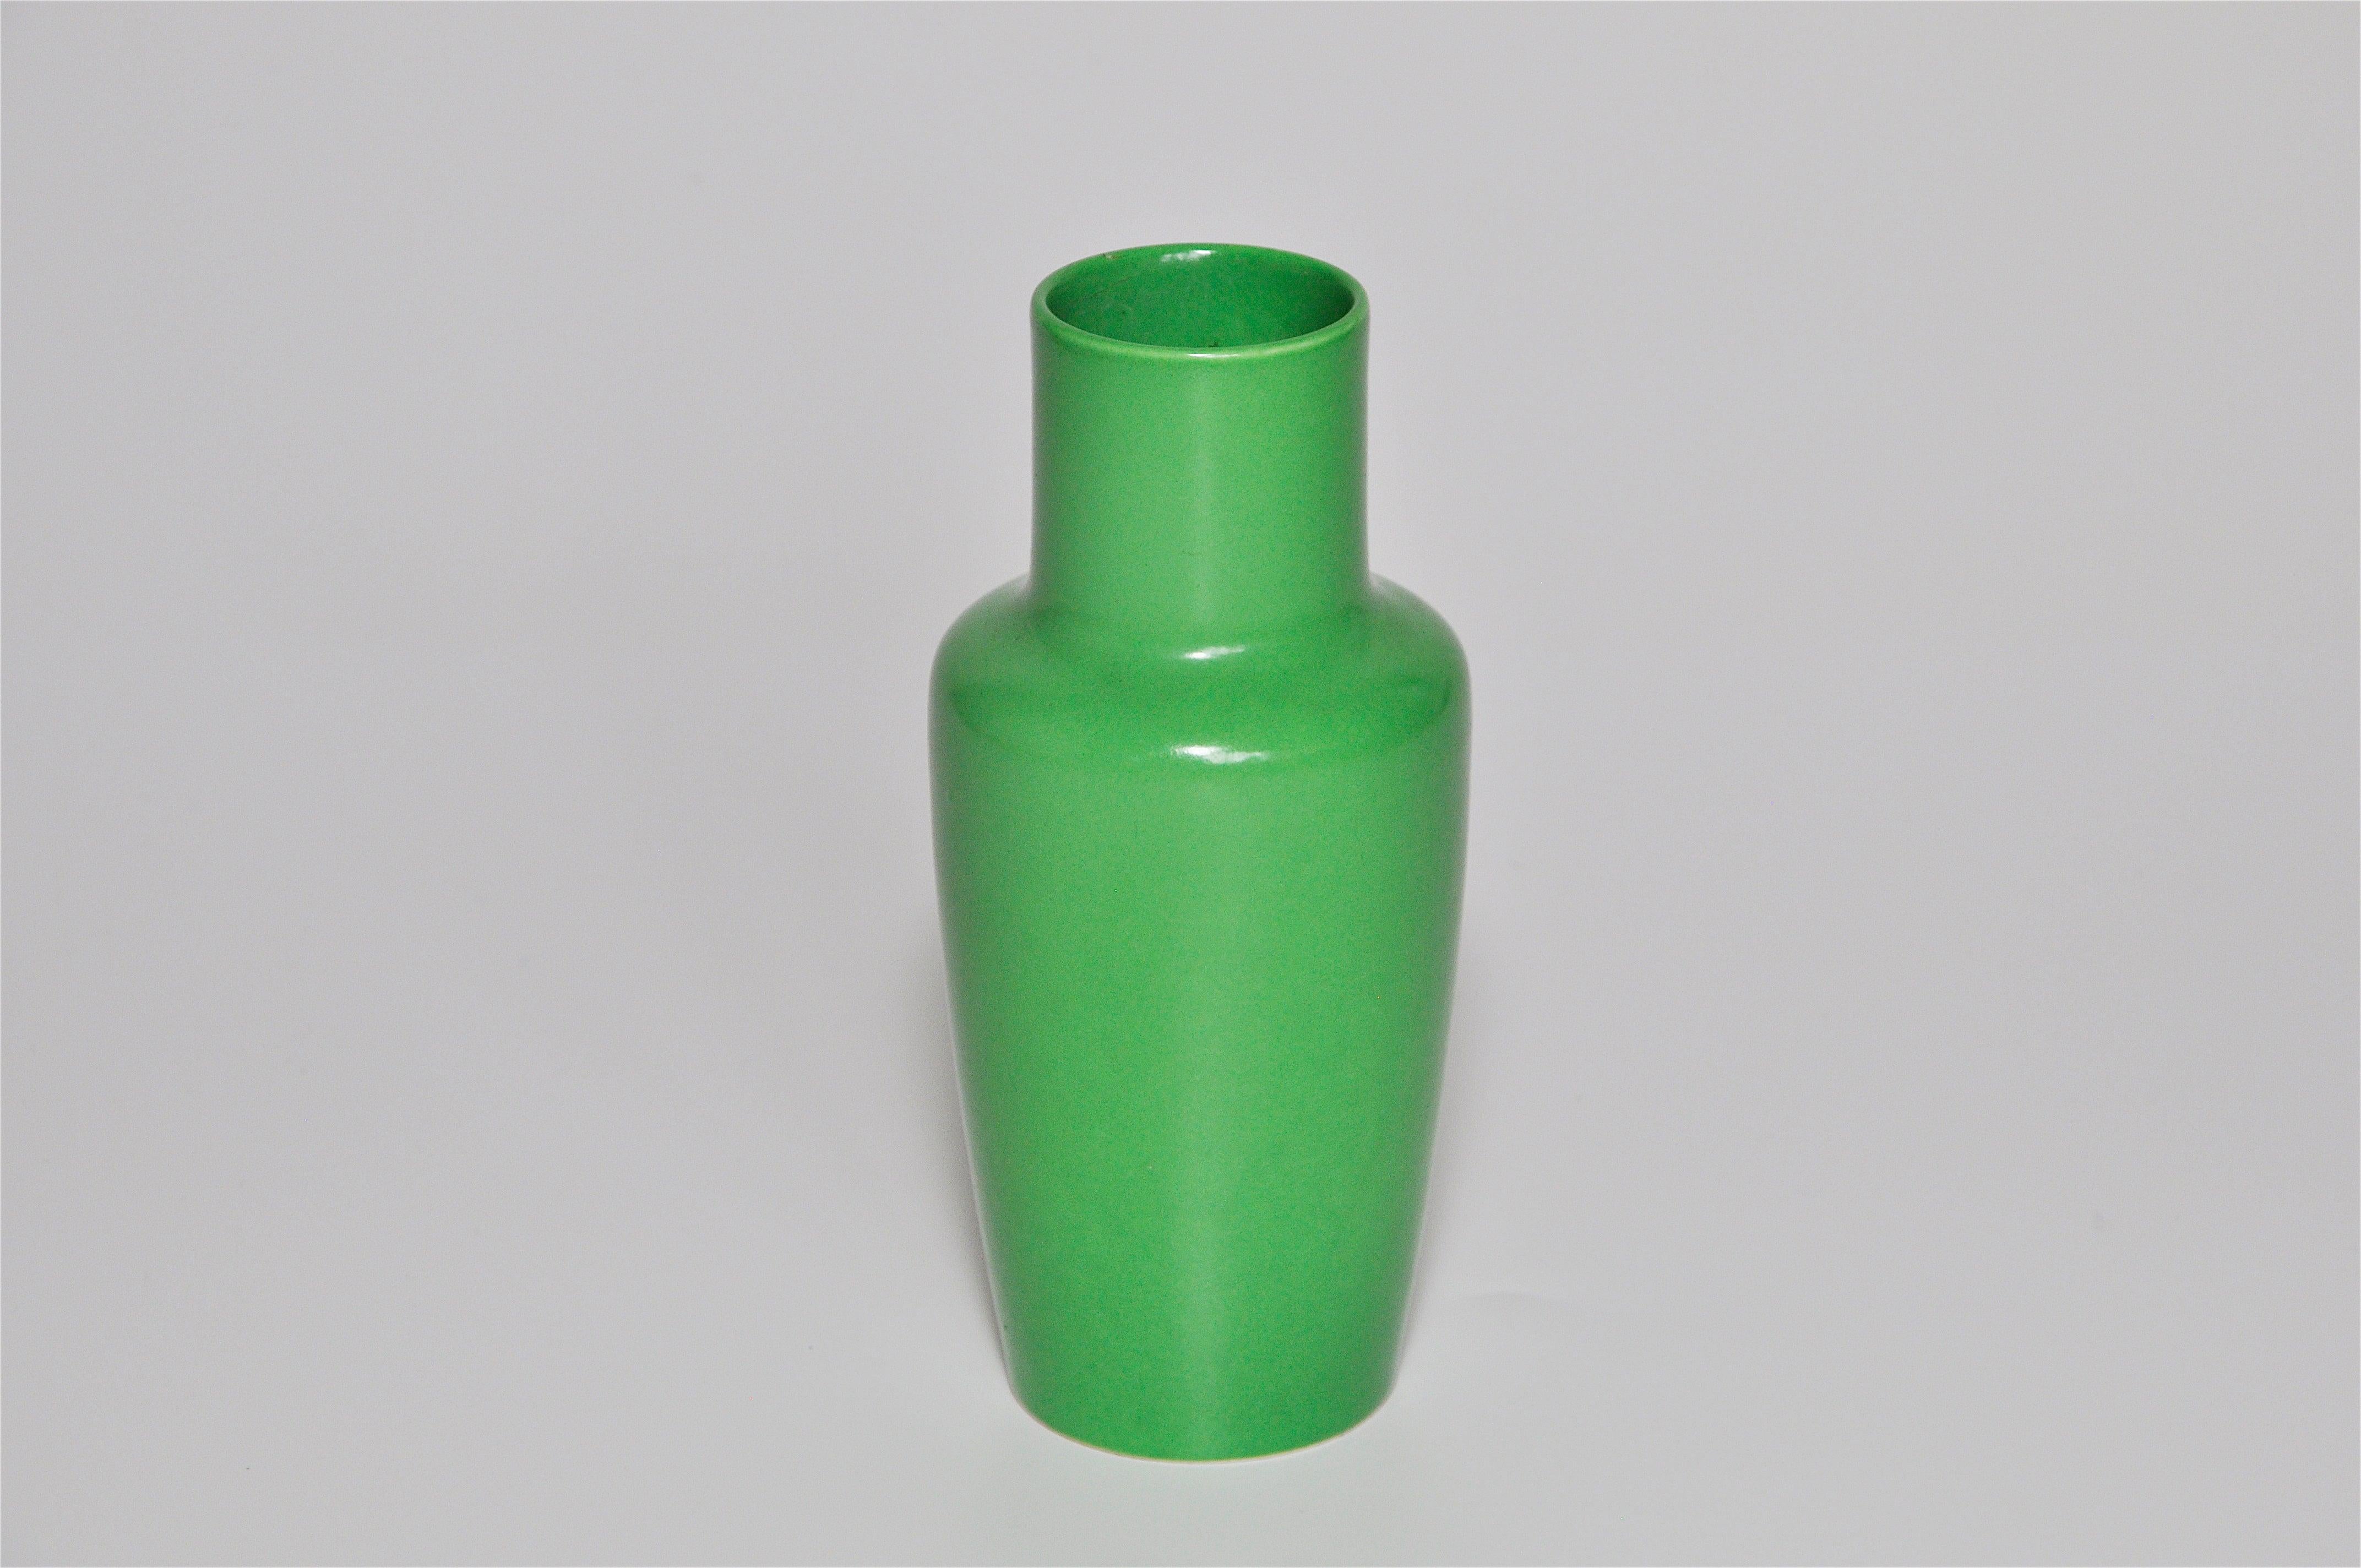 A stunning mono-color small vase in apple green with a semi-matte finish. Stamped with the marks ‘Ruskin’, ‘England’ and the date ‘1920’. The Ruskin Pottery was founded by William Howson Taylor who named it after John Ruskin, the prominent British